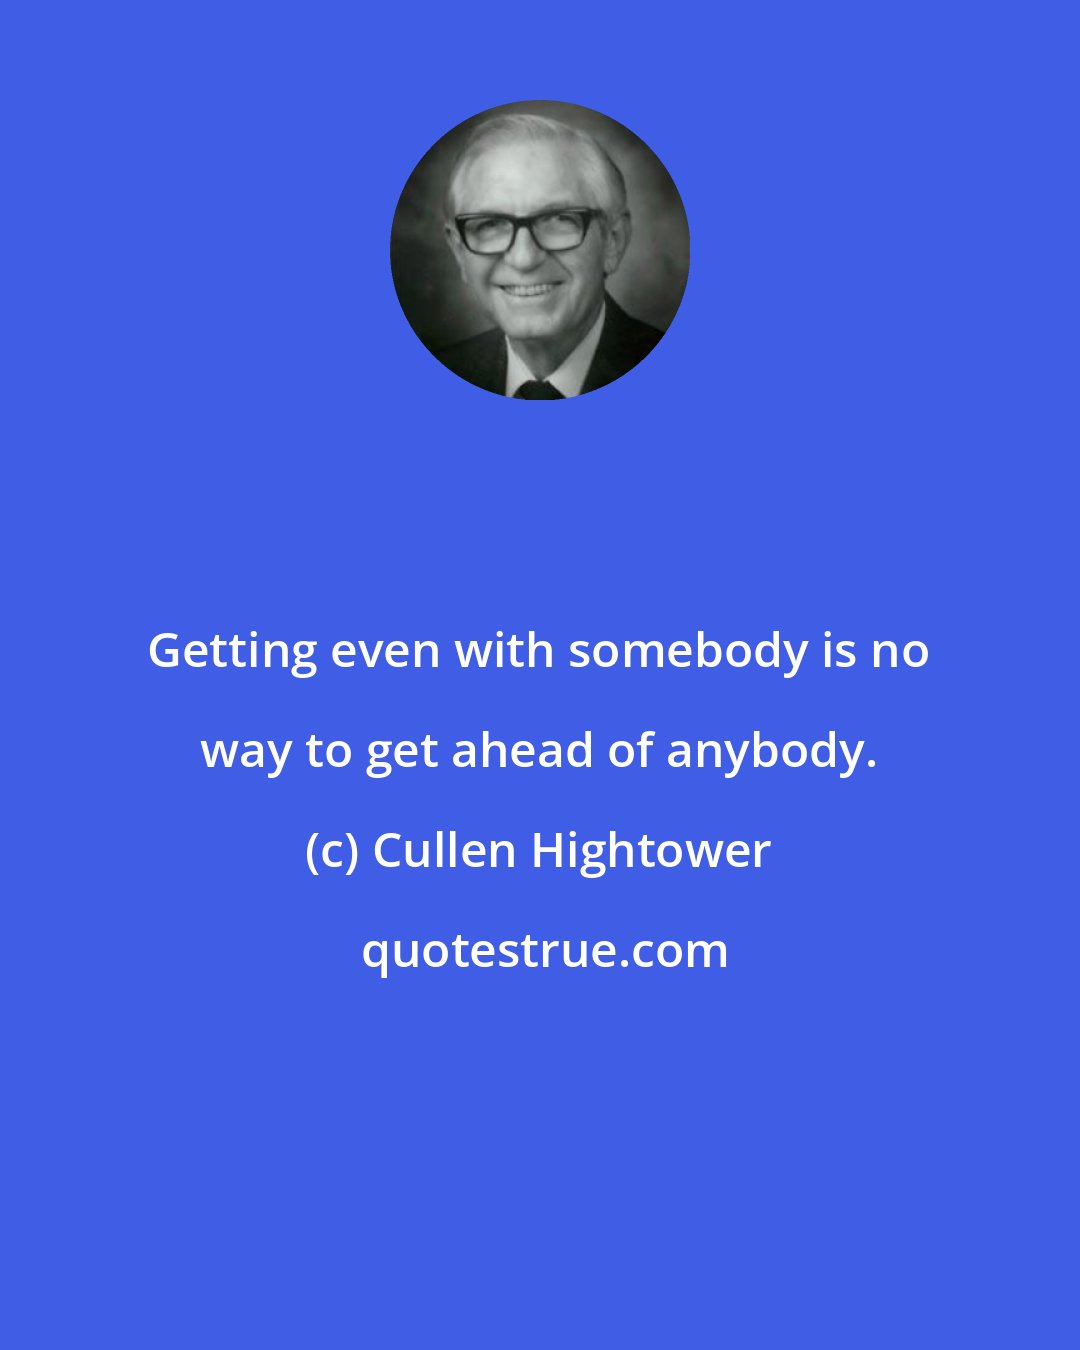 Cullen Hightower: Getting even with somebody is no way to get ahead of anybody.